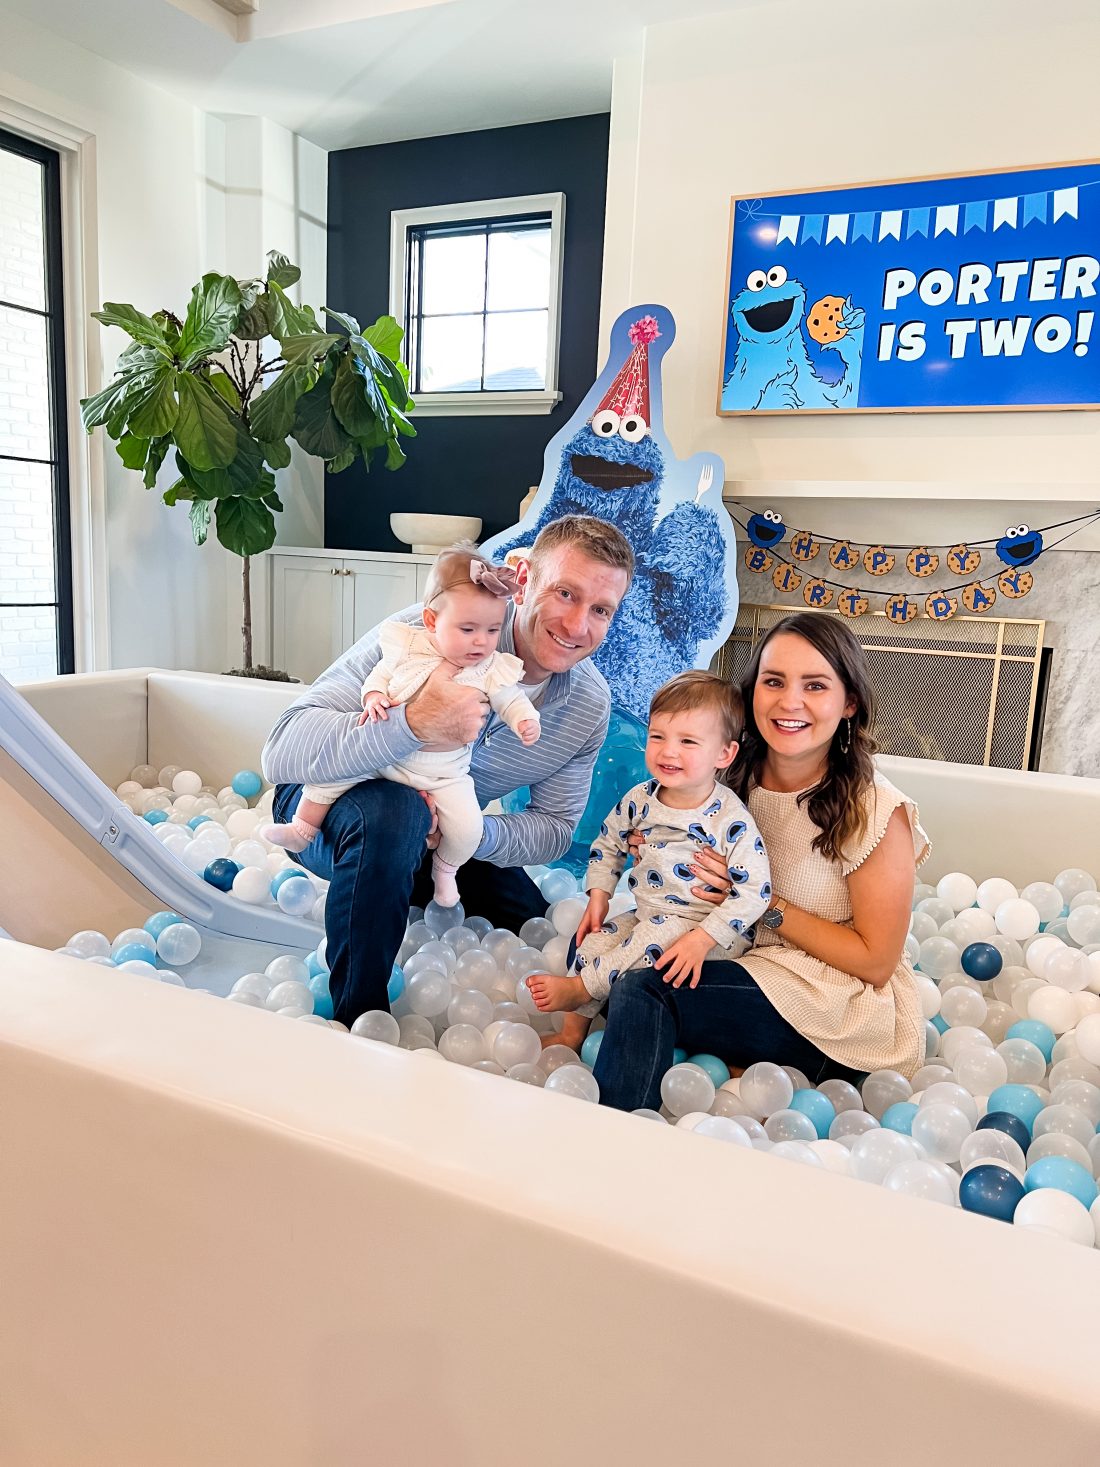 Cookie Monster birthday party